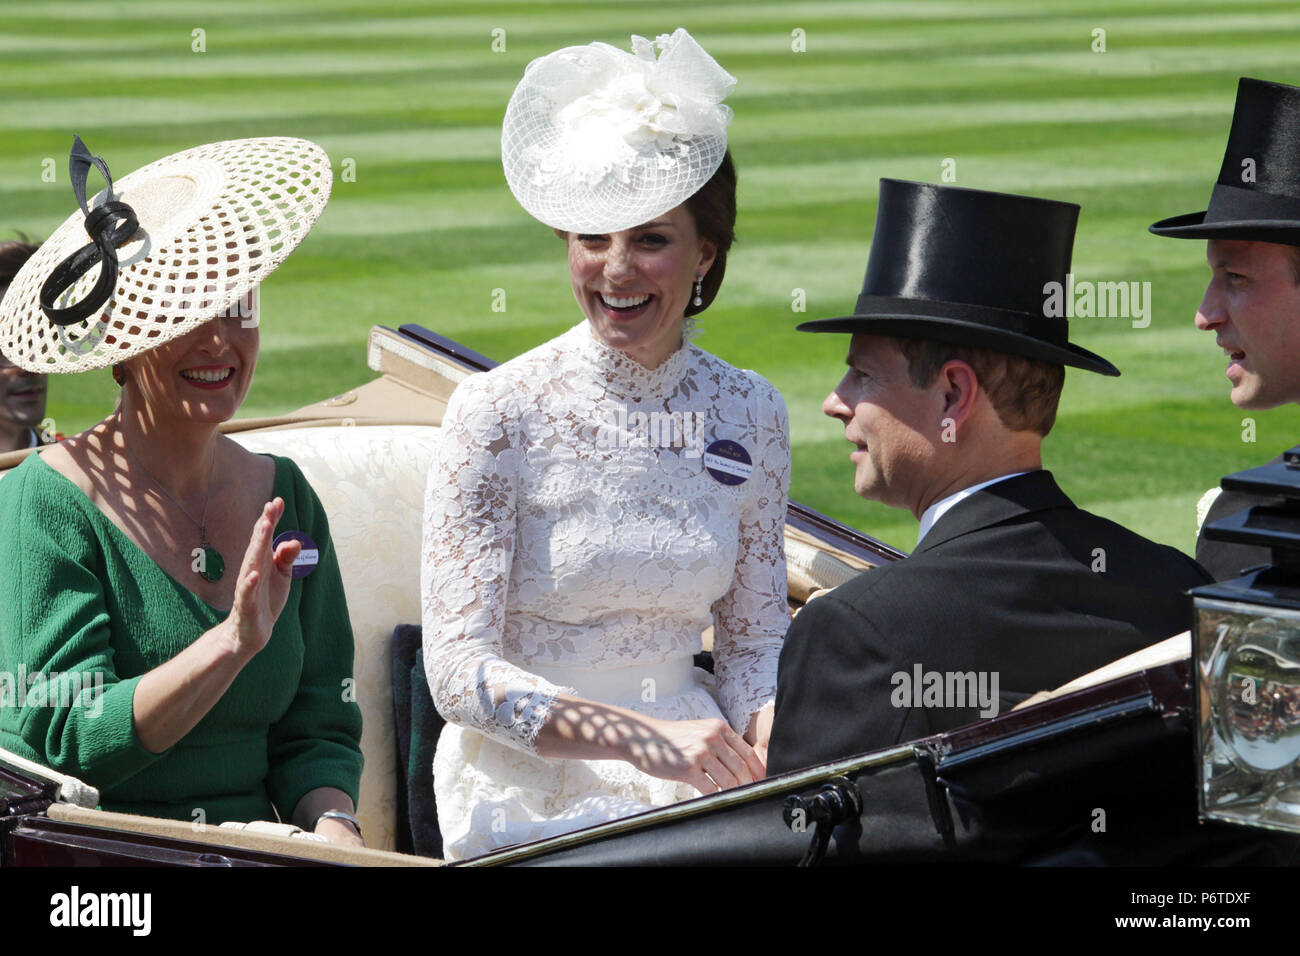 Royal Ascot, Royal Procession. Sophie, Countess of Wessex, Prince Edward, Catherine, Duchess of Cambridge and William Prince arriving at the racecourse Stock Photo